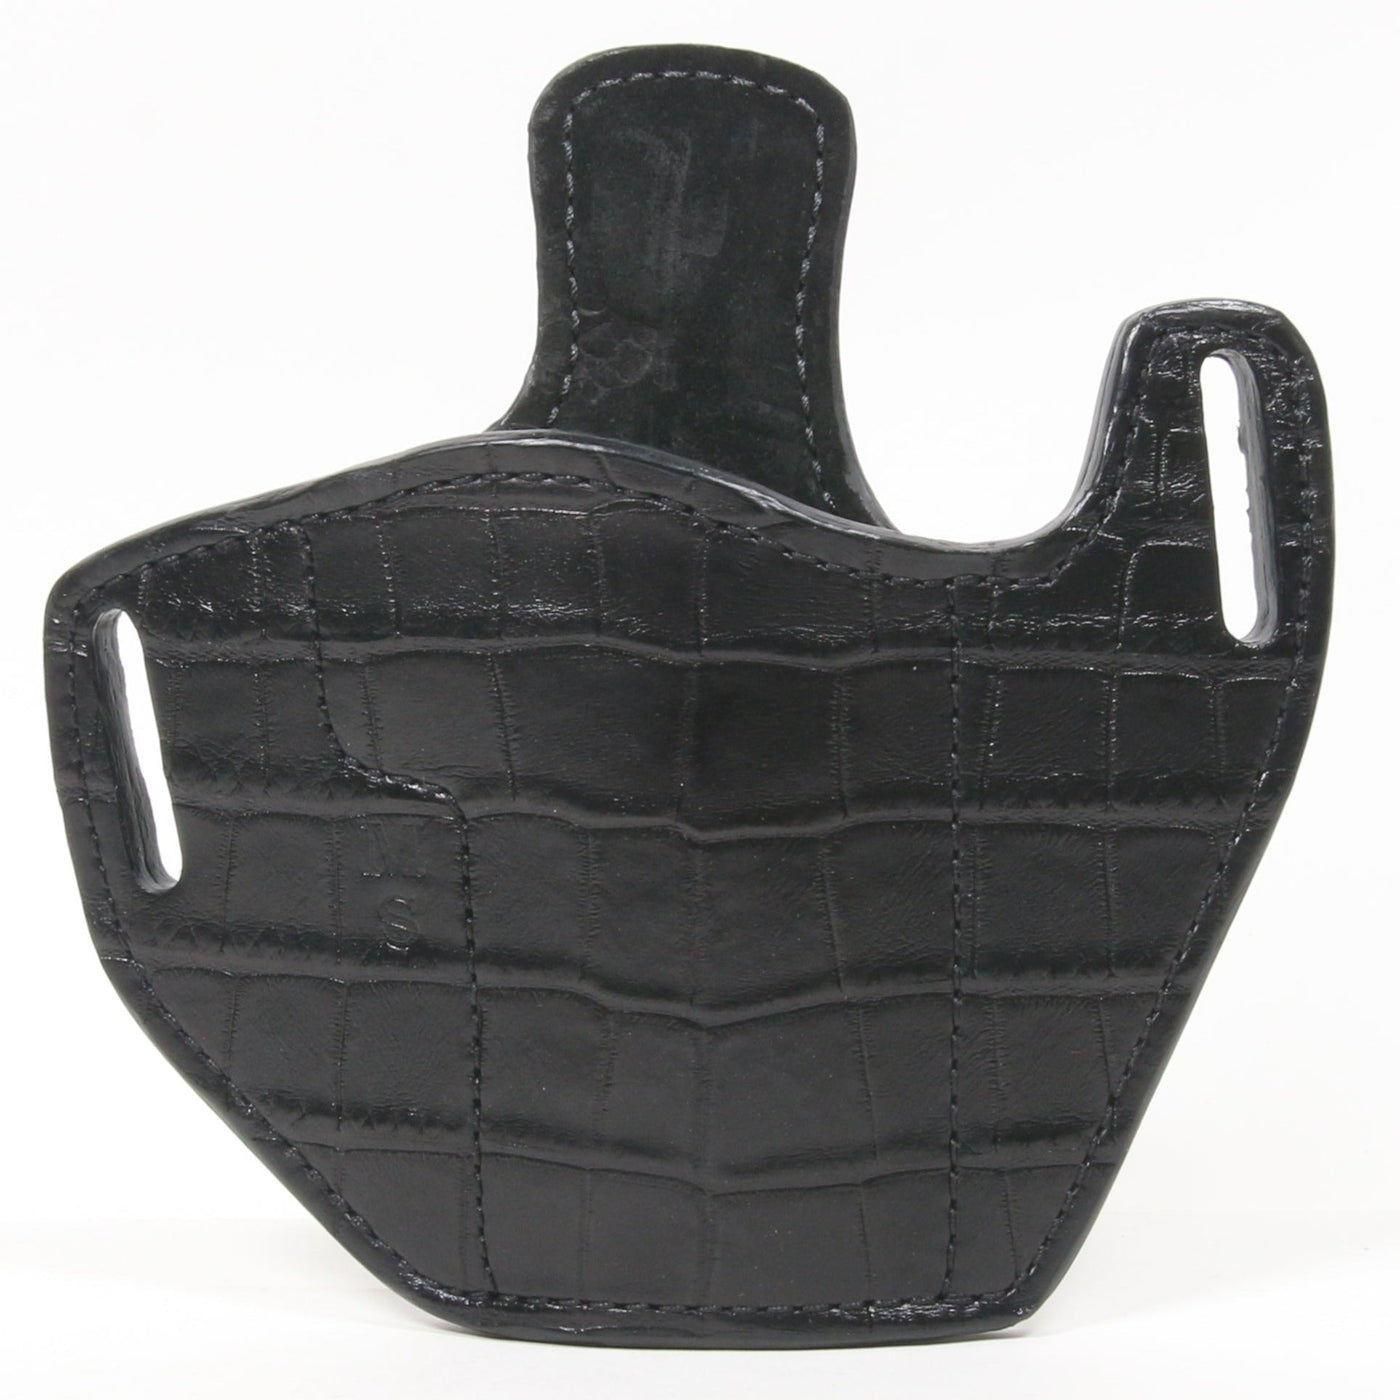 OWB Alligator Holster for STI DVC-P with Red Dot Optic